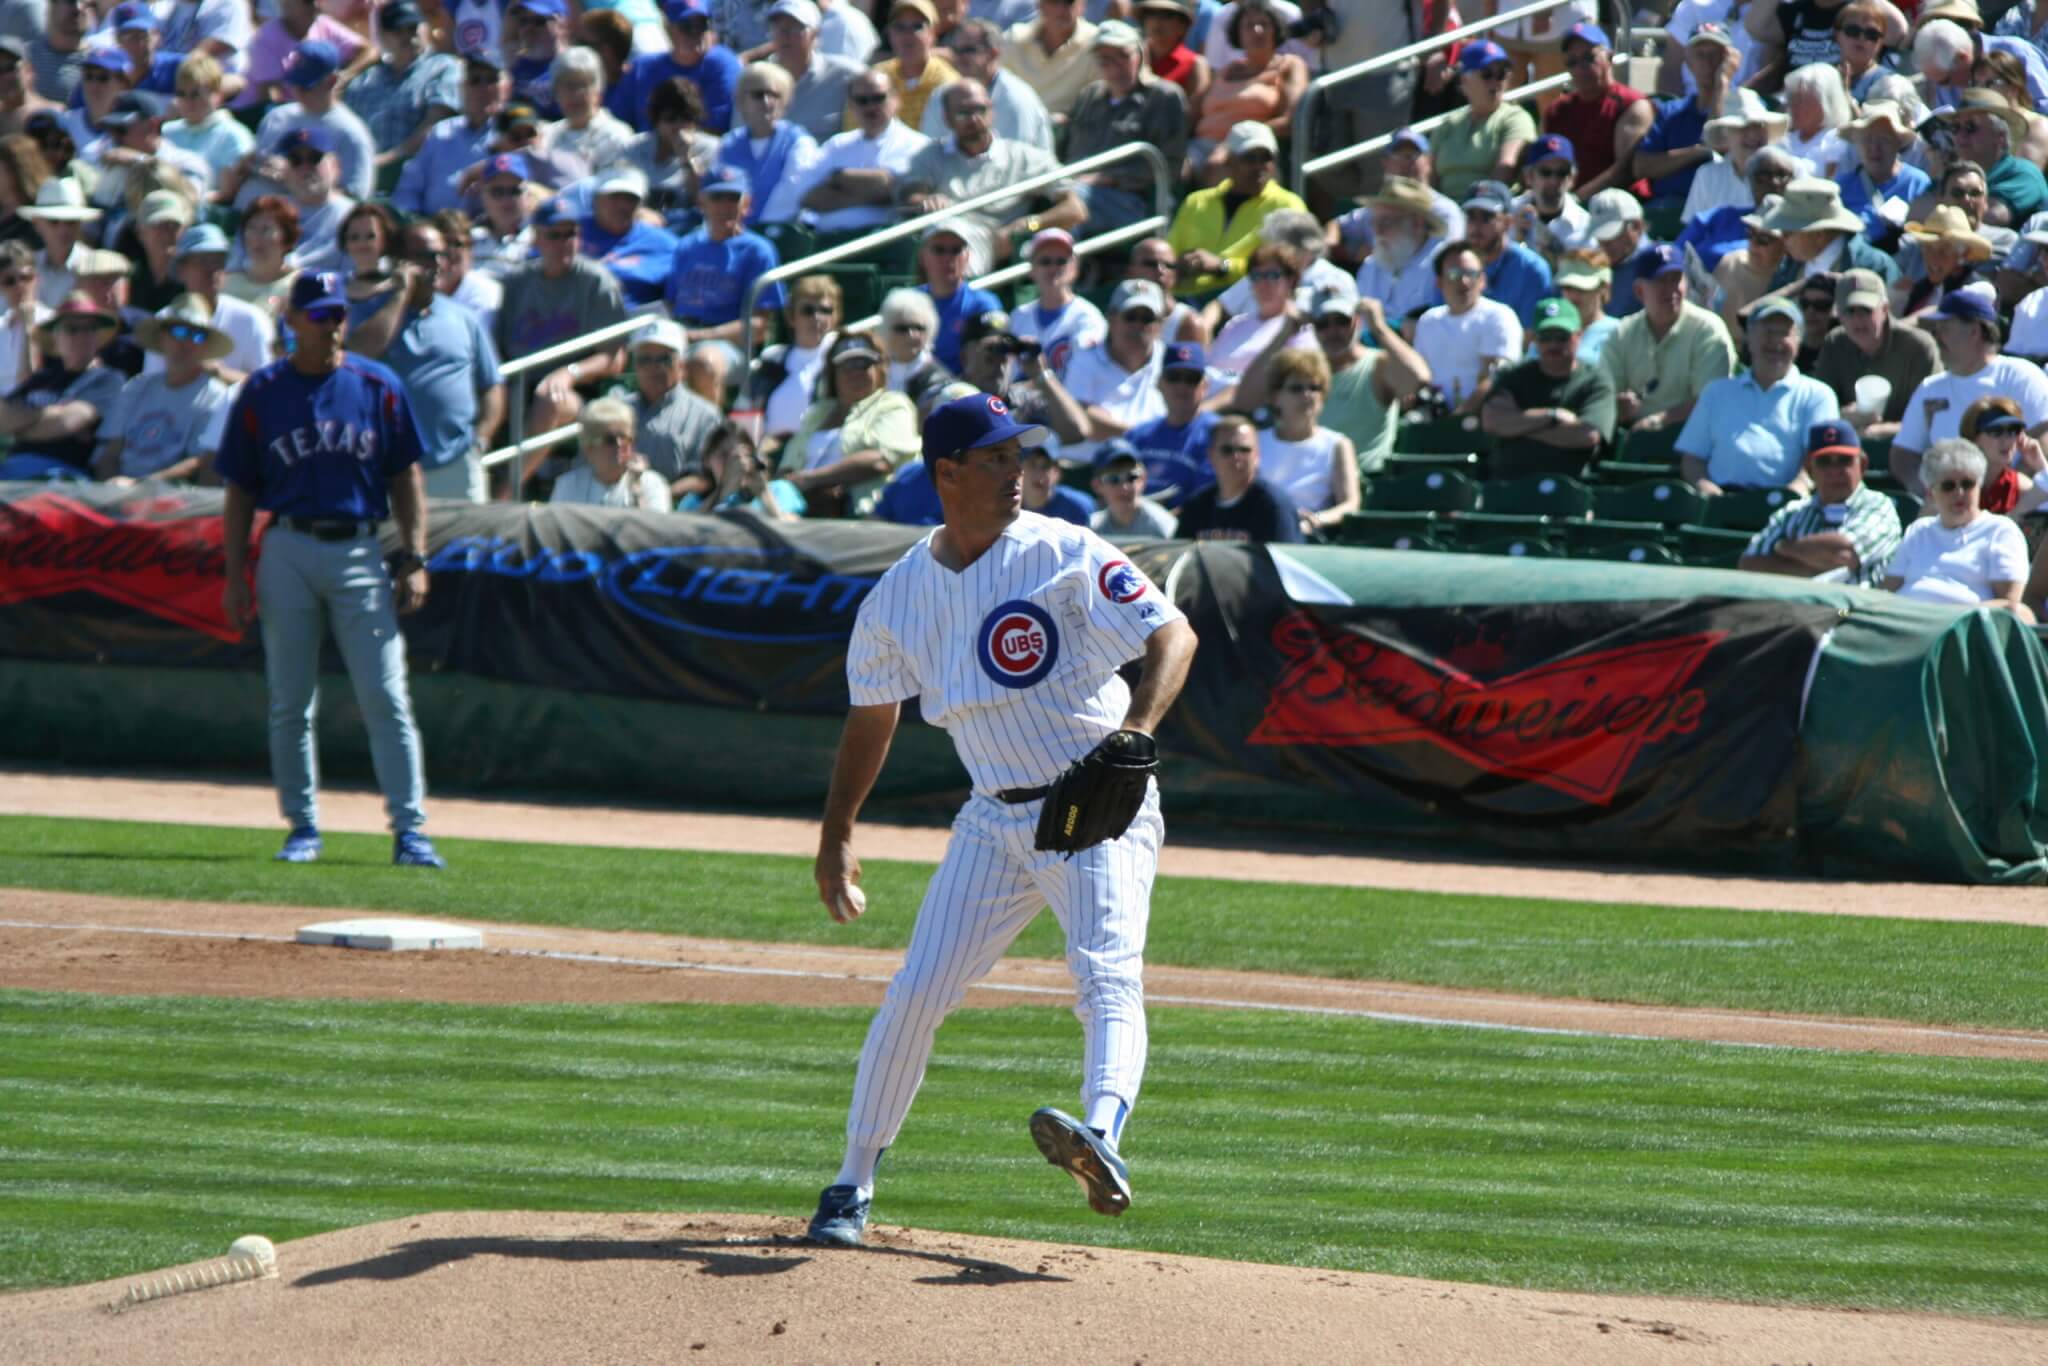 Greg Maddux pitching on Cubs